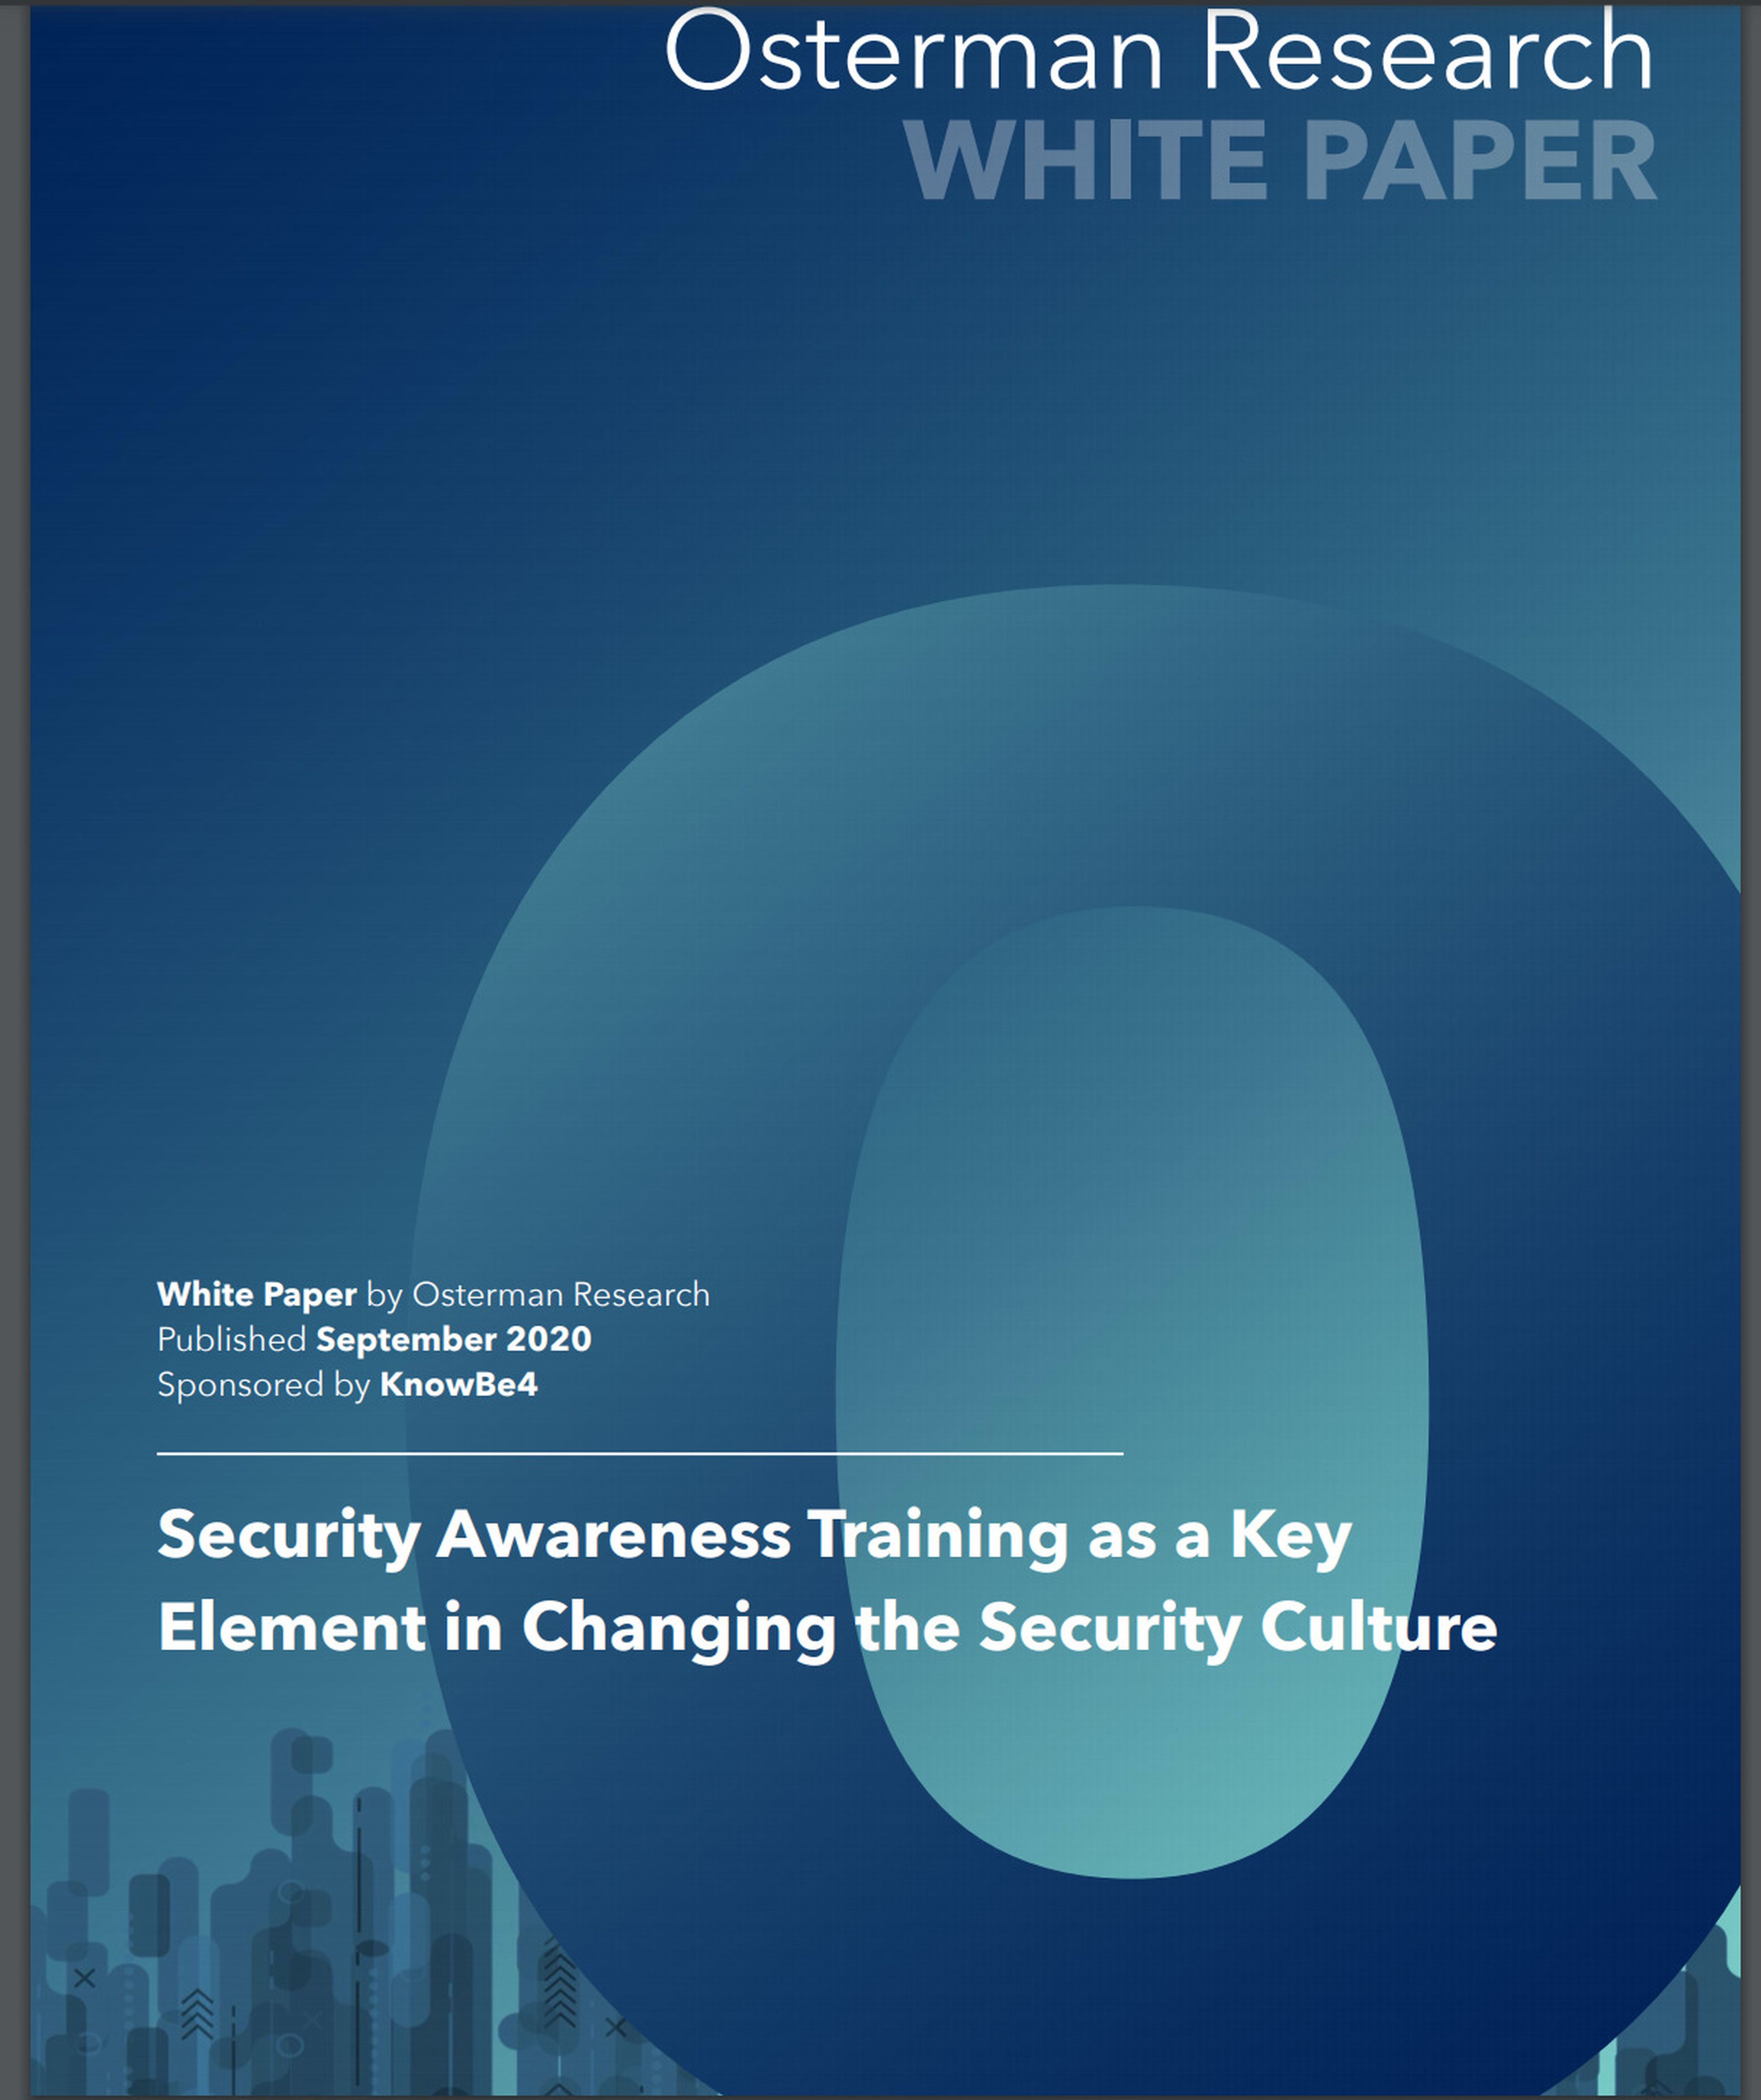 Security Awareness Training as a Key Element in Changing the Security Culture